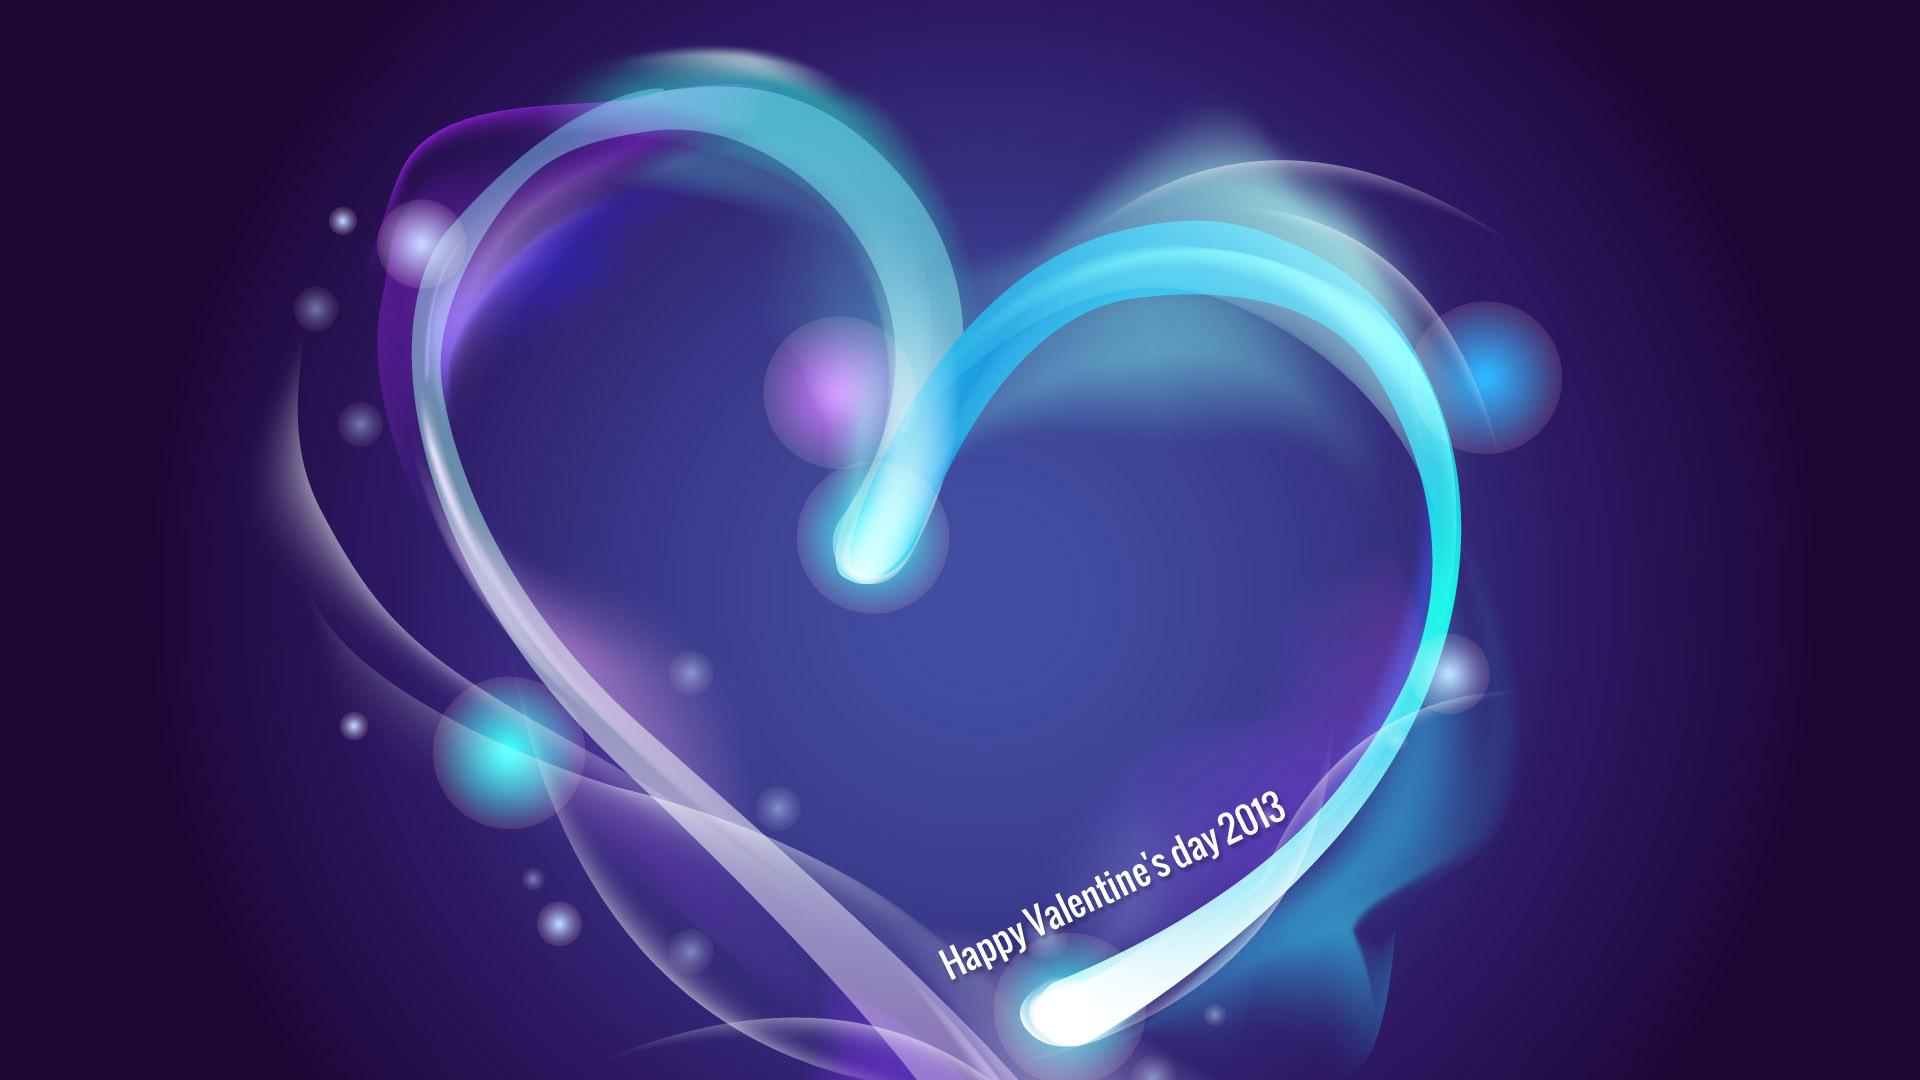 Wallpaper Valentines Day Heart Abstract Purple And Blue